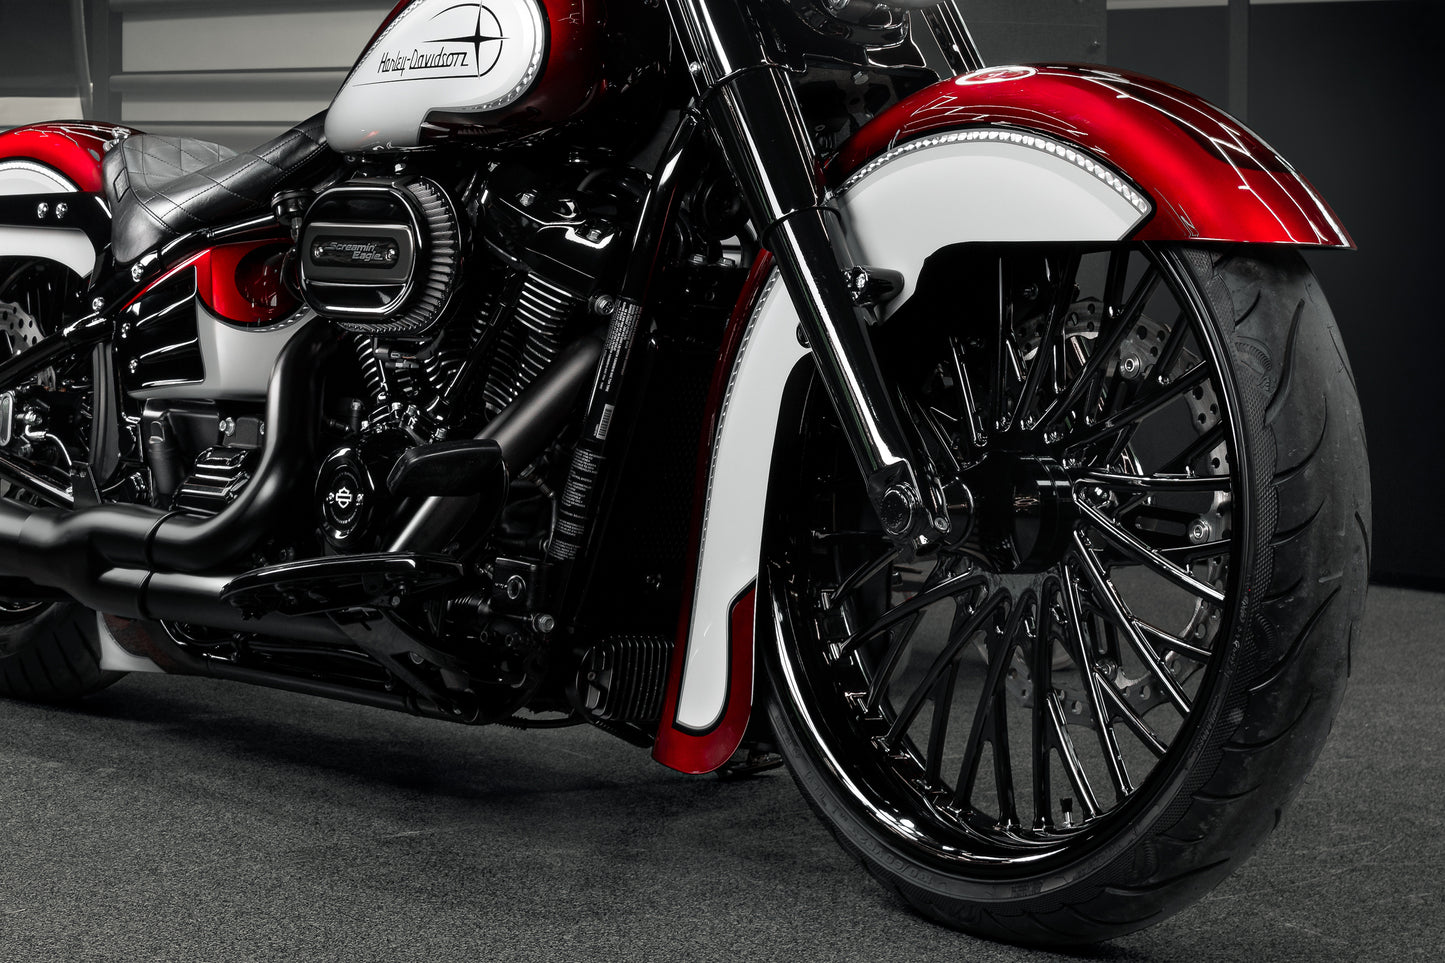 Harley Davidson motorcycle with Killer Custom "Hot rod series" front fender from the front in an industrial environment